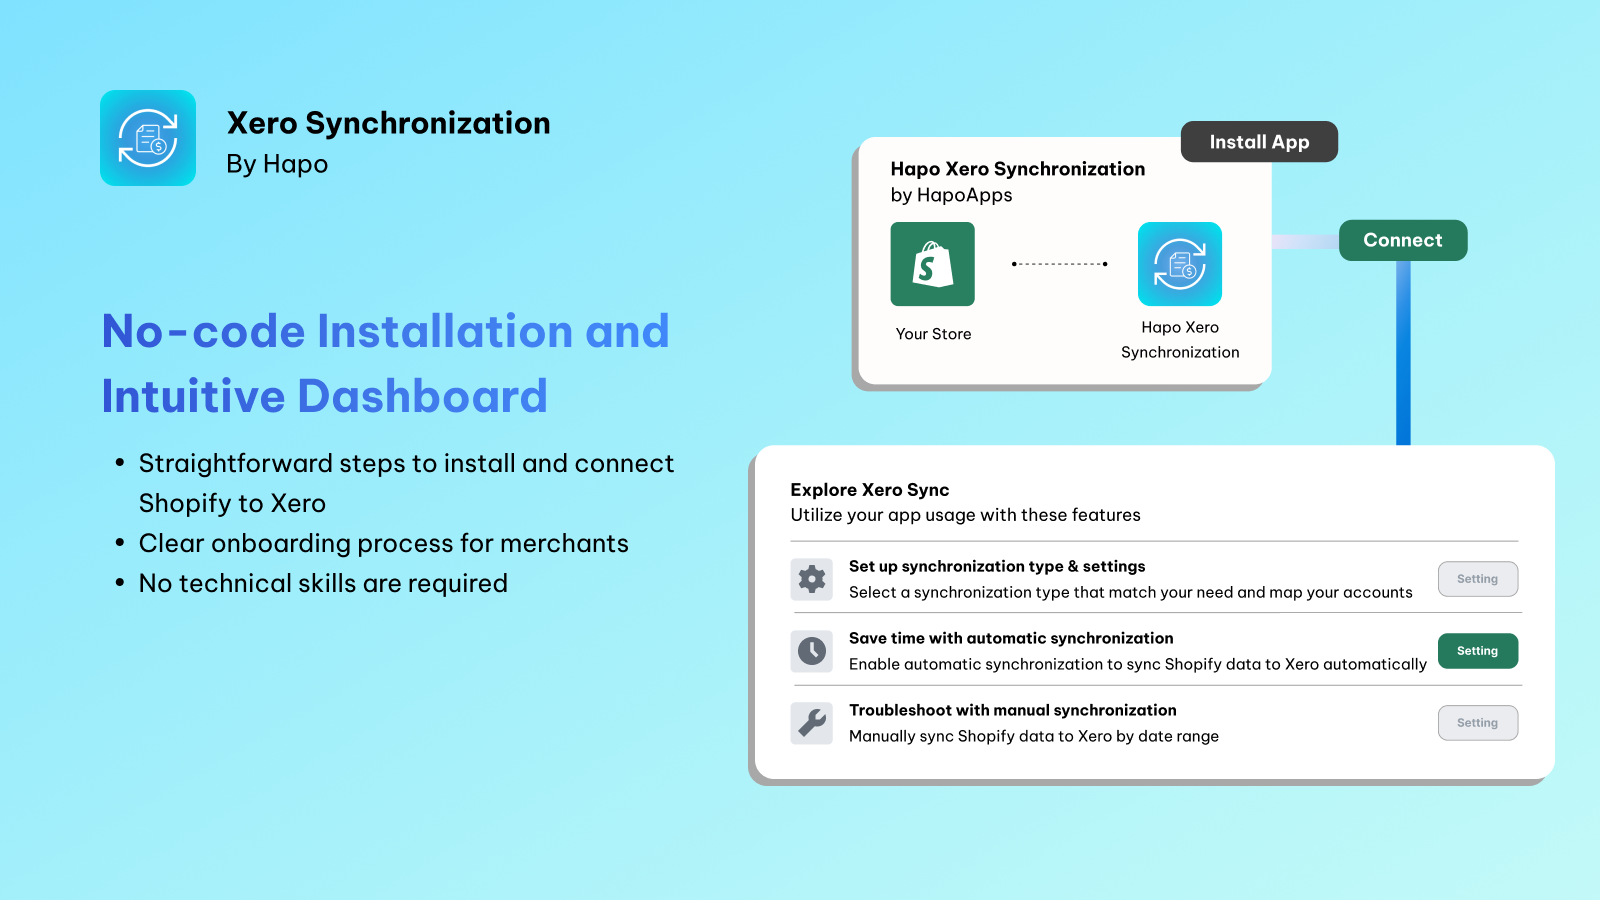 No-code Installation and Intuitive Dashboard.